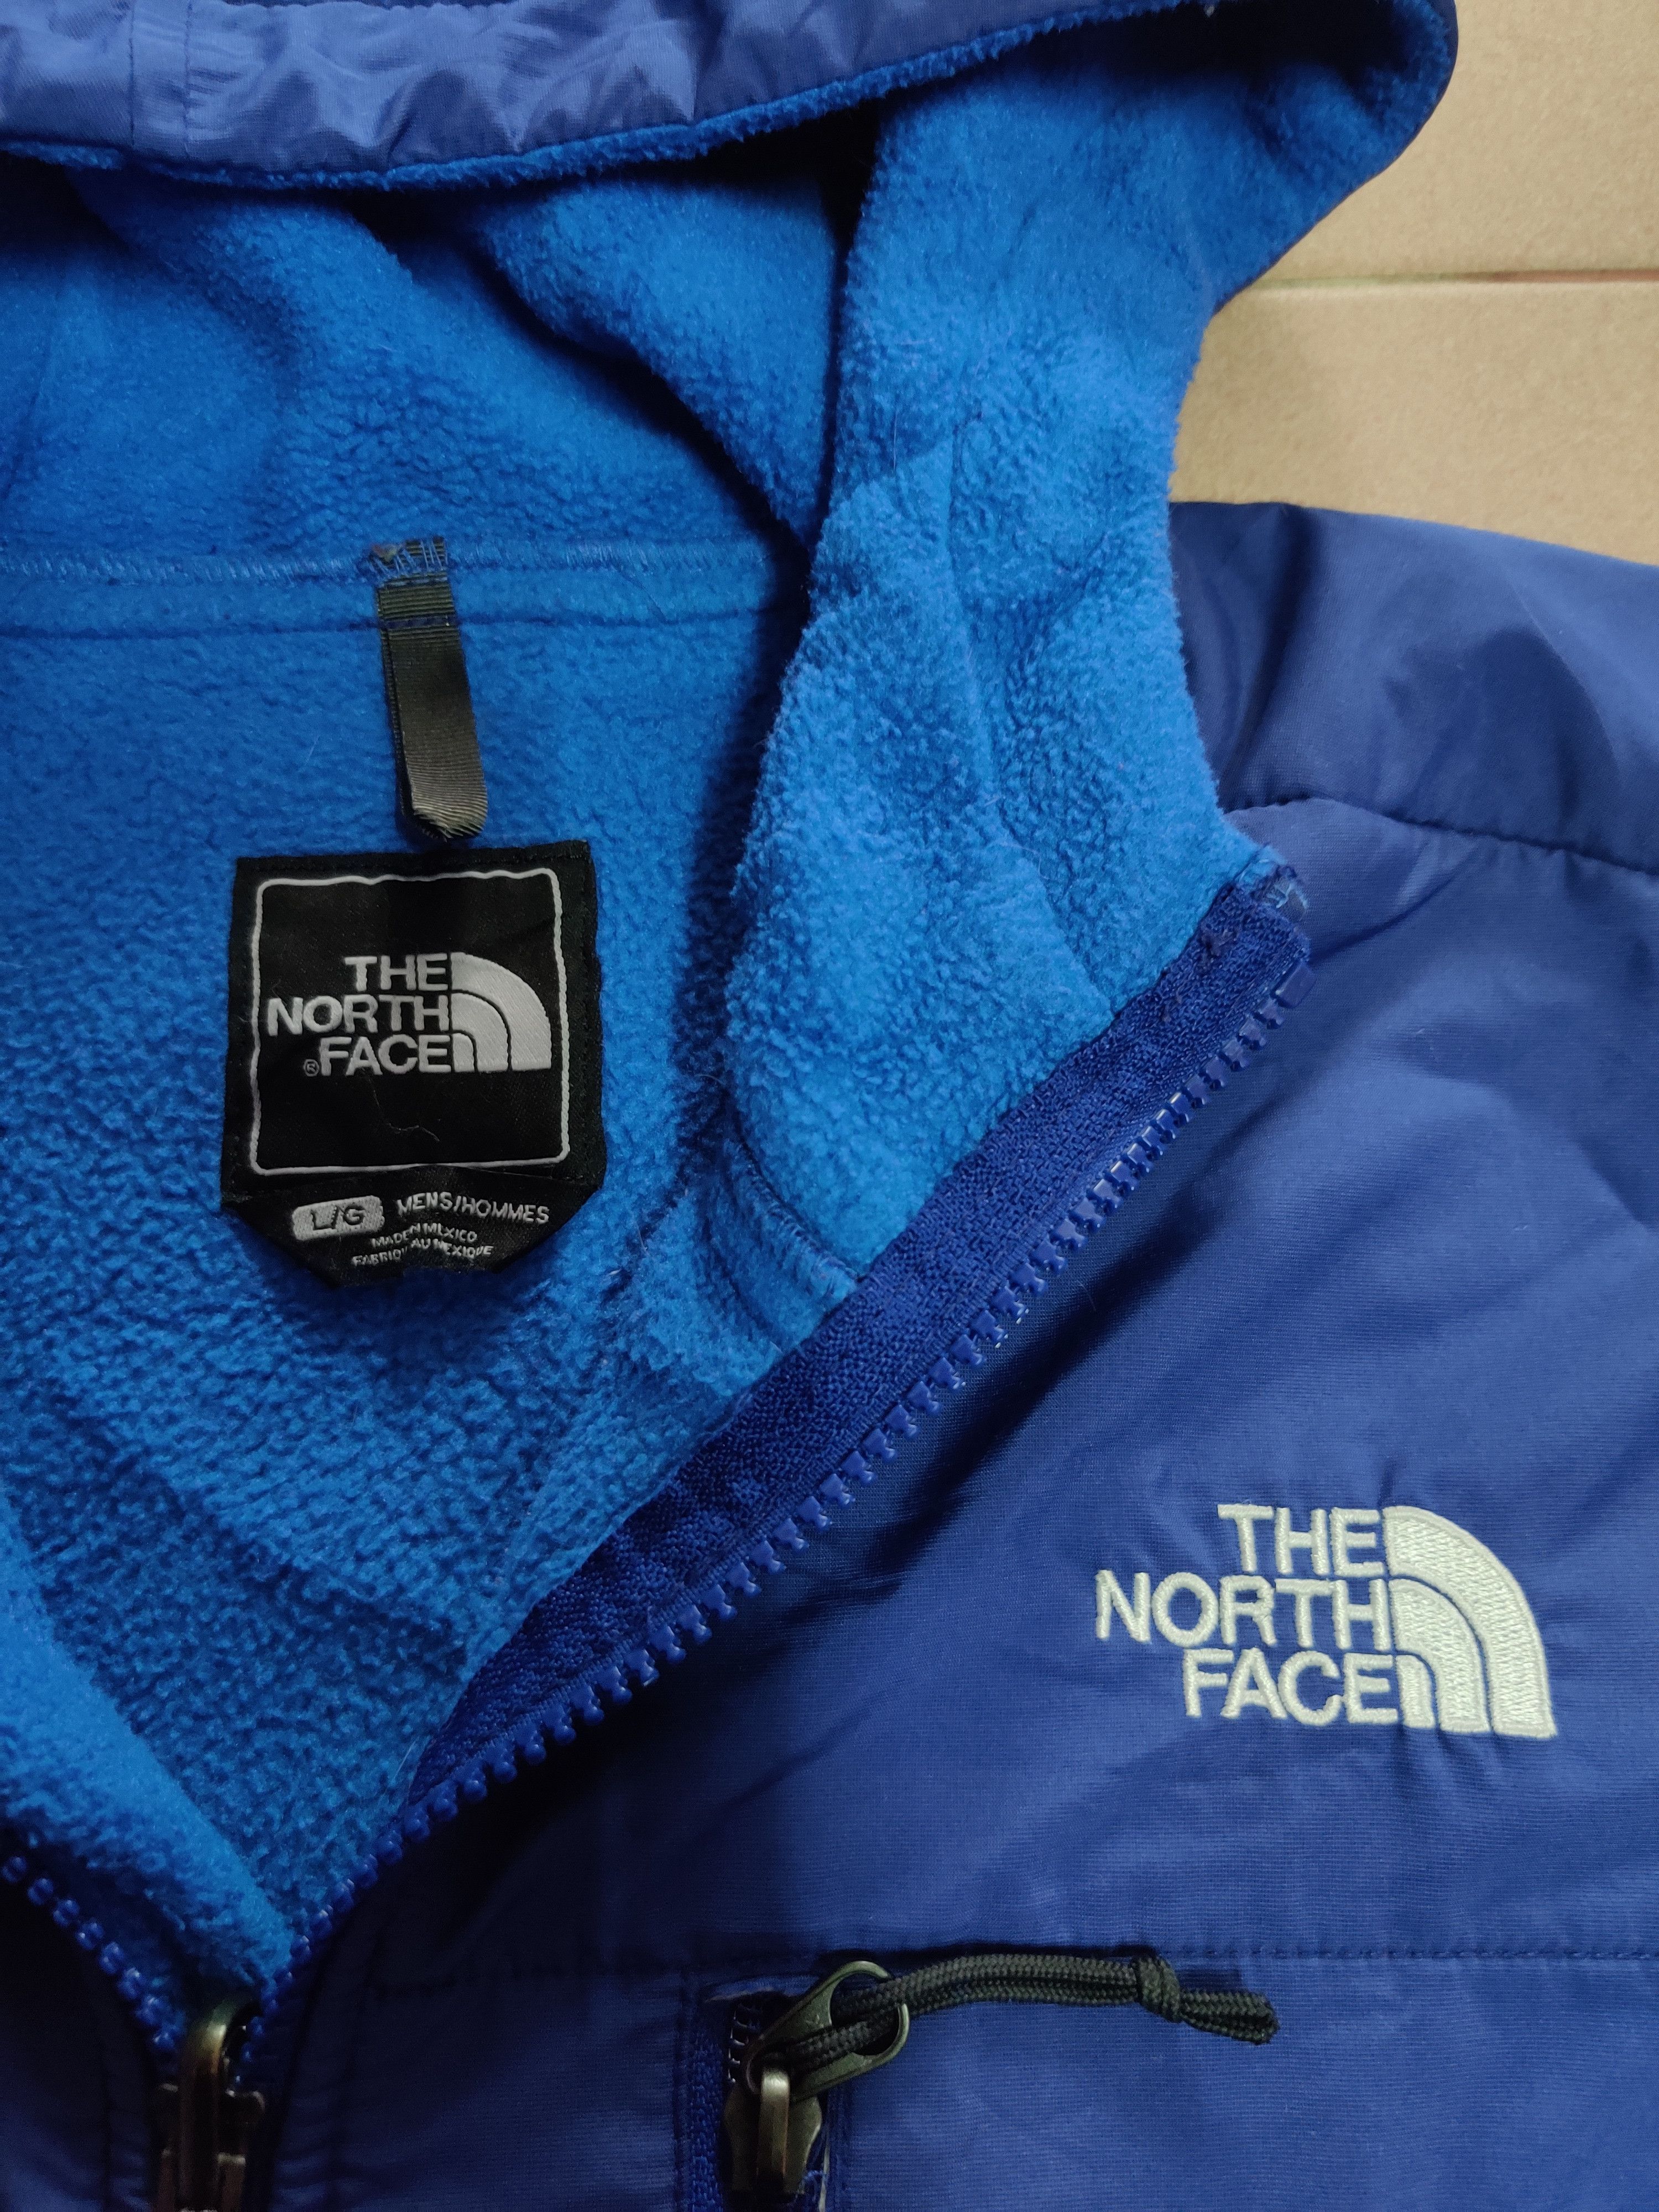 The North Face The north face denali fleece jacket Size US L / EU 52-54 / 3 - 7 Preview